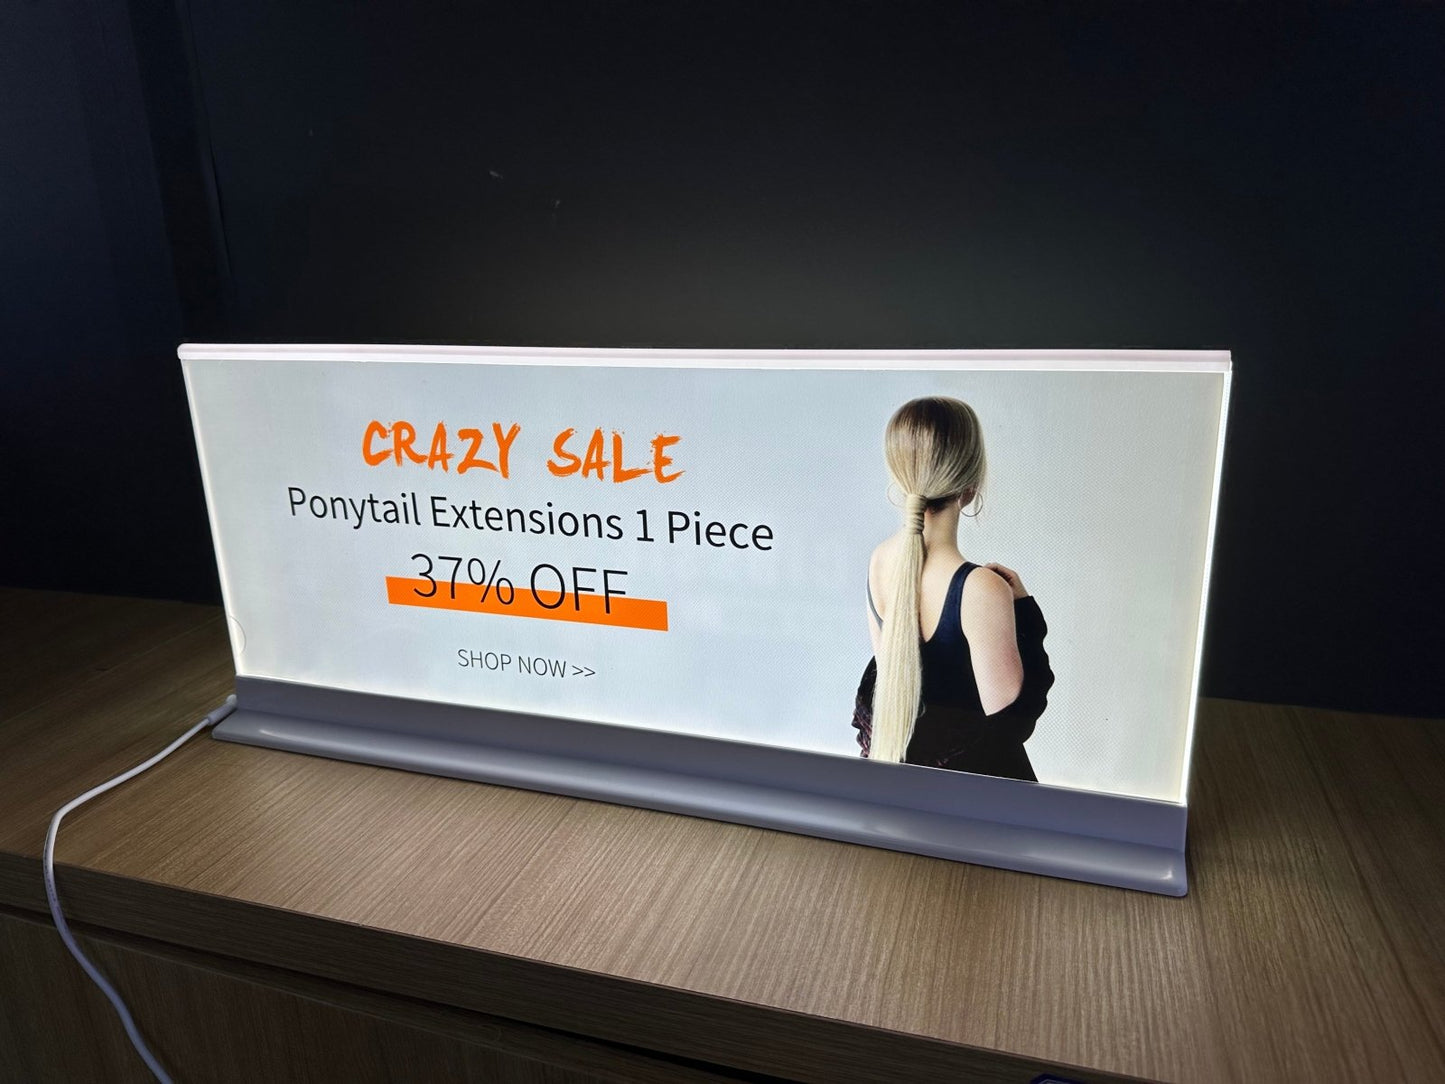 SALE sign | Promotional Tag Sign